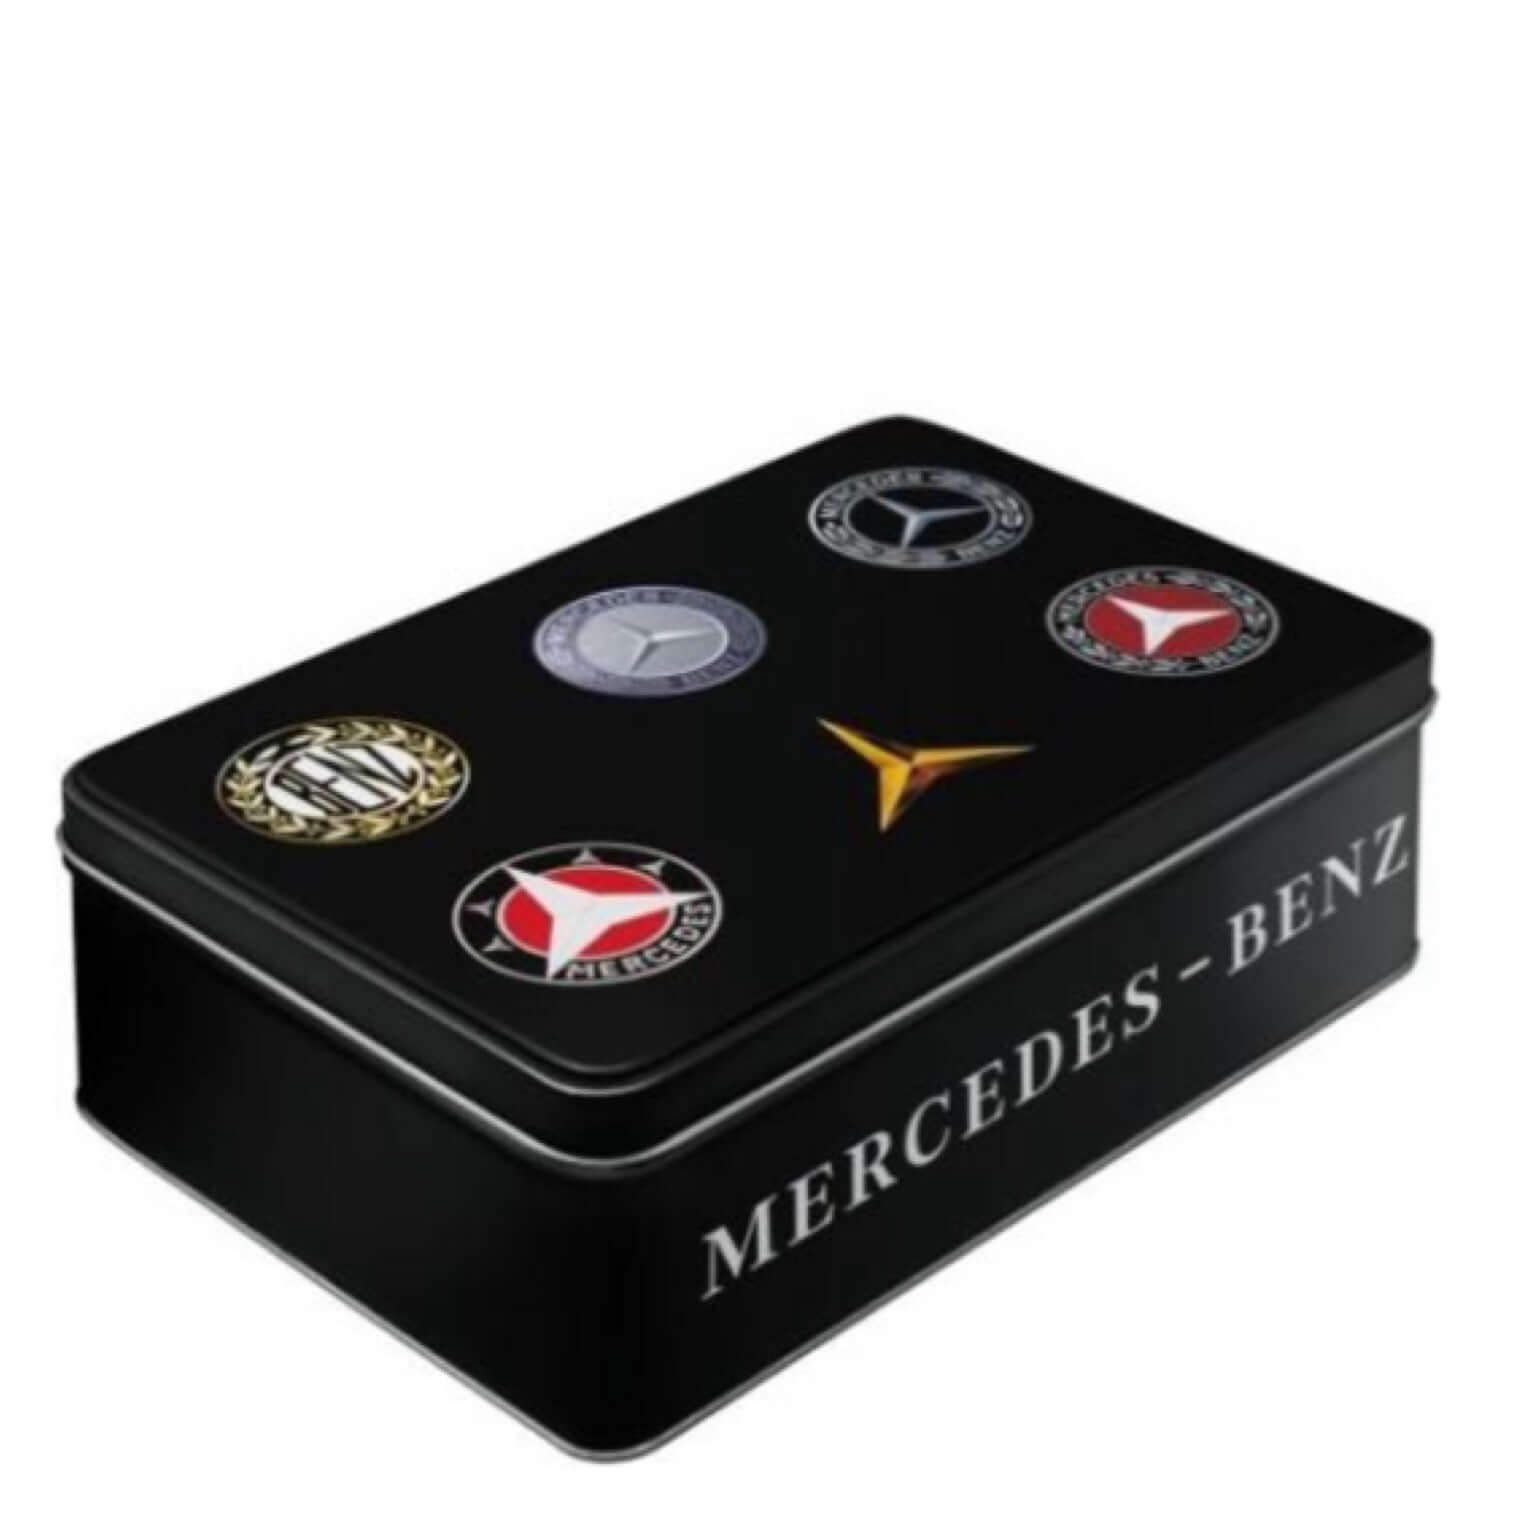 Box Tin Container Mercedes-Benz Logo Evolution Vintage Retro - The Renmy Store Homewares & Gifts 